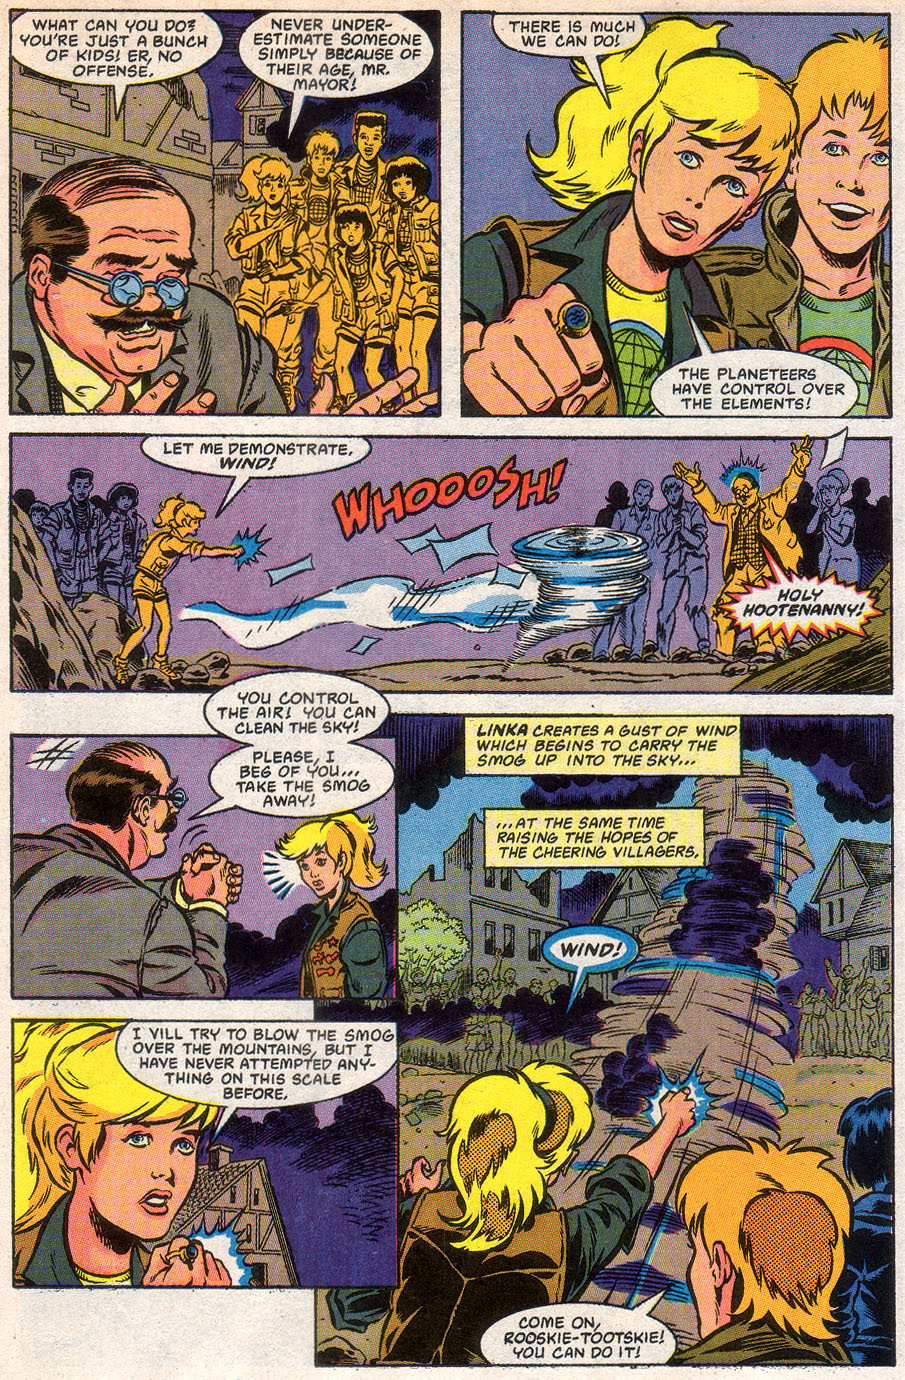 Captain Planet and the Planeteers 2 Page 14